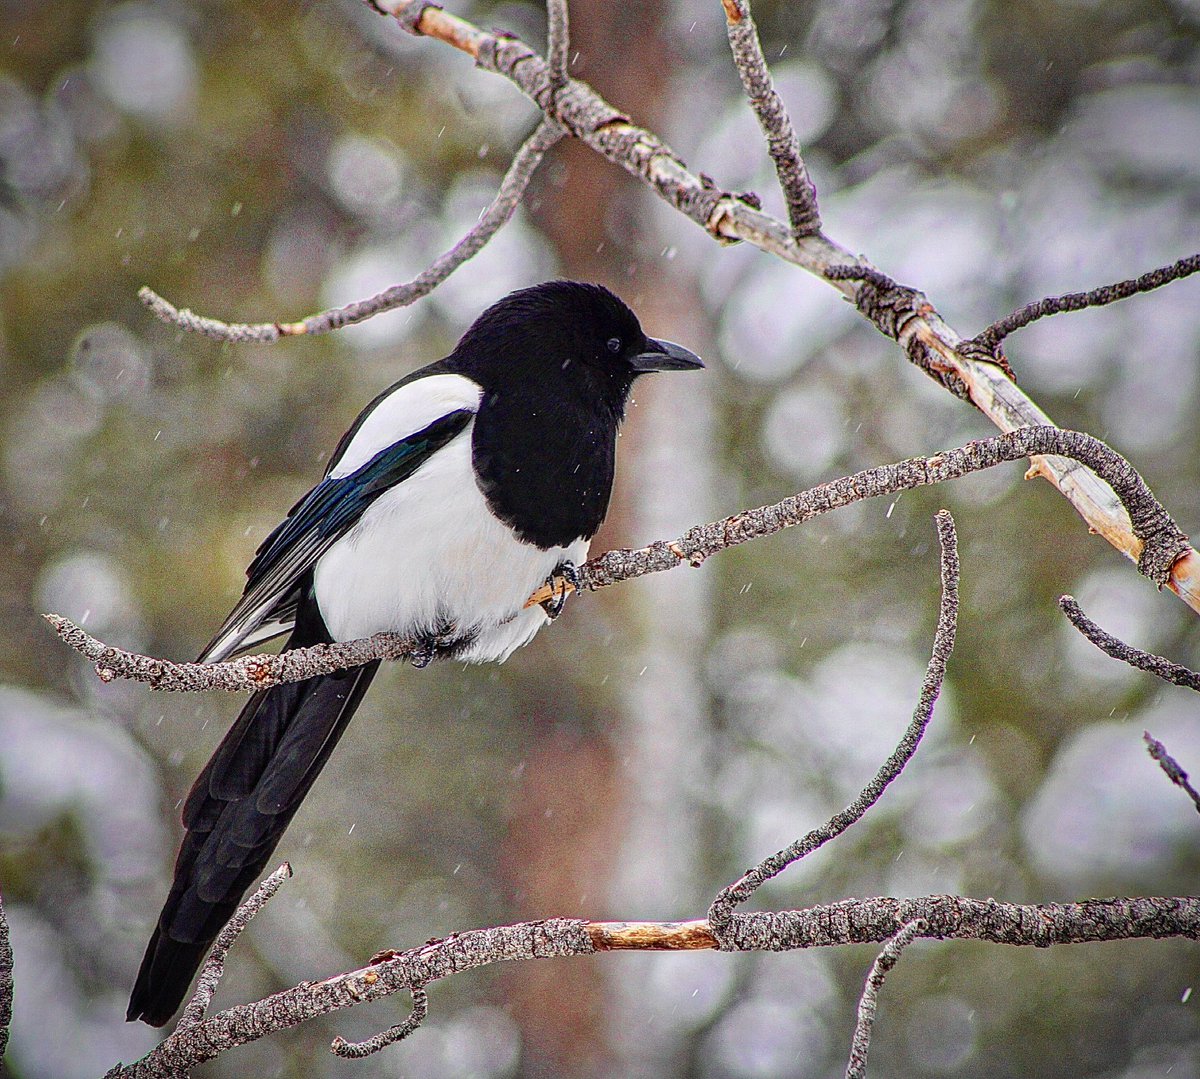 Awaiting the stars of magic…

A black-billed Magpie at the Rocky Mountains National Park…

#wildlife #birding @CanonUSA